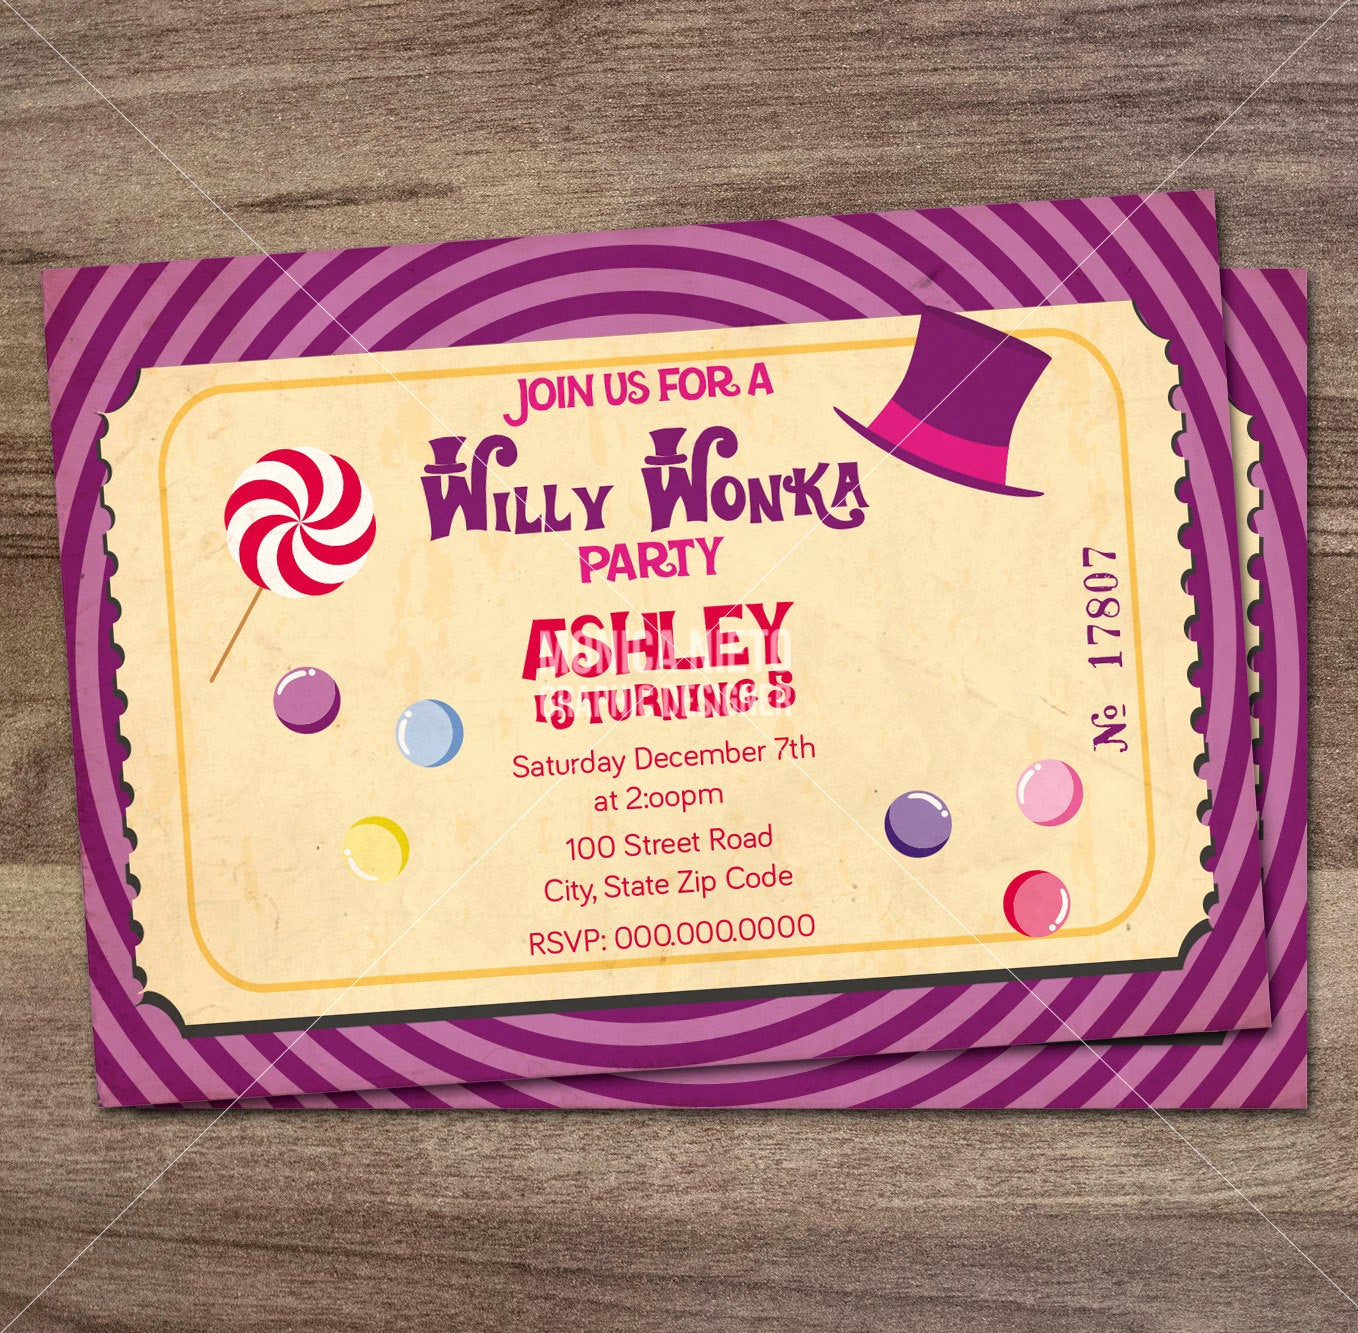 Willy Wonka Golden Ticket Invitation Best Of Willy Wonka Birthday Party Invitation Charlie and the